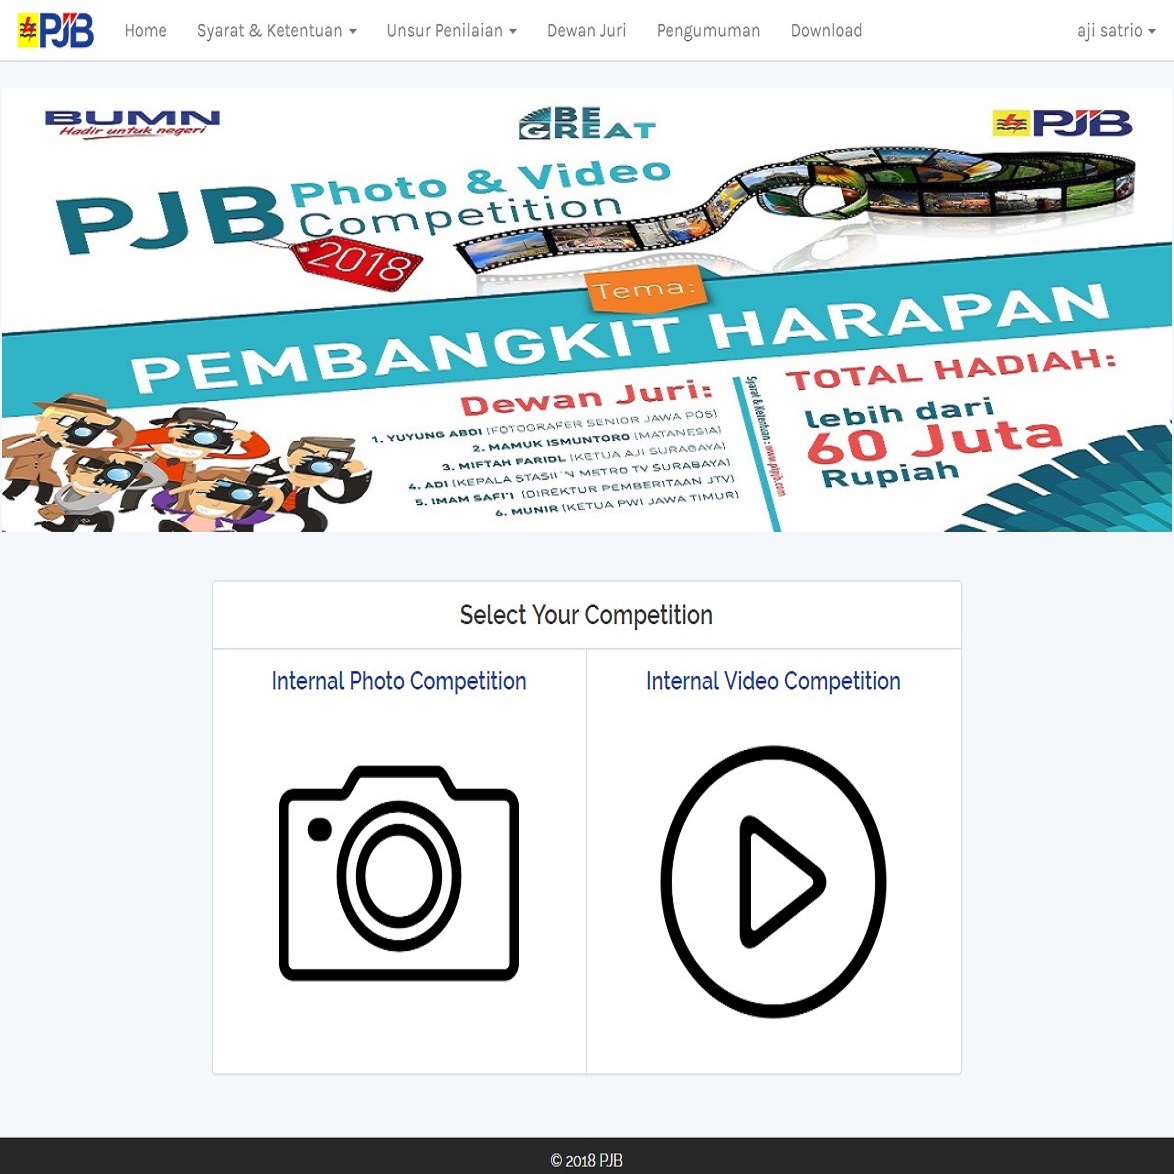 PJB Photo & Video Competition